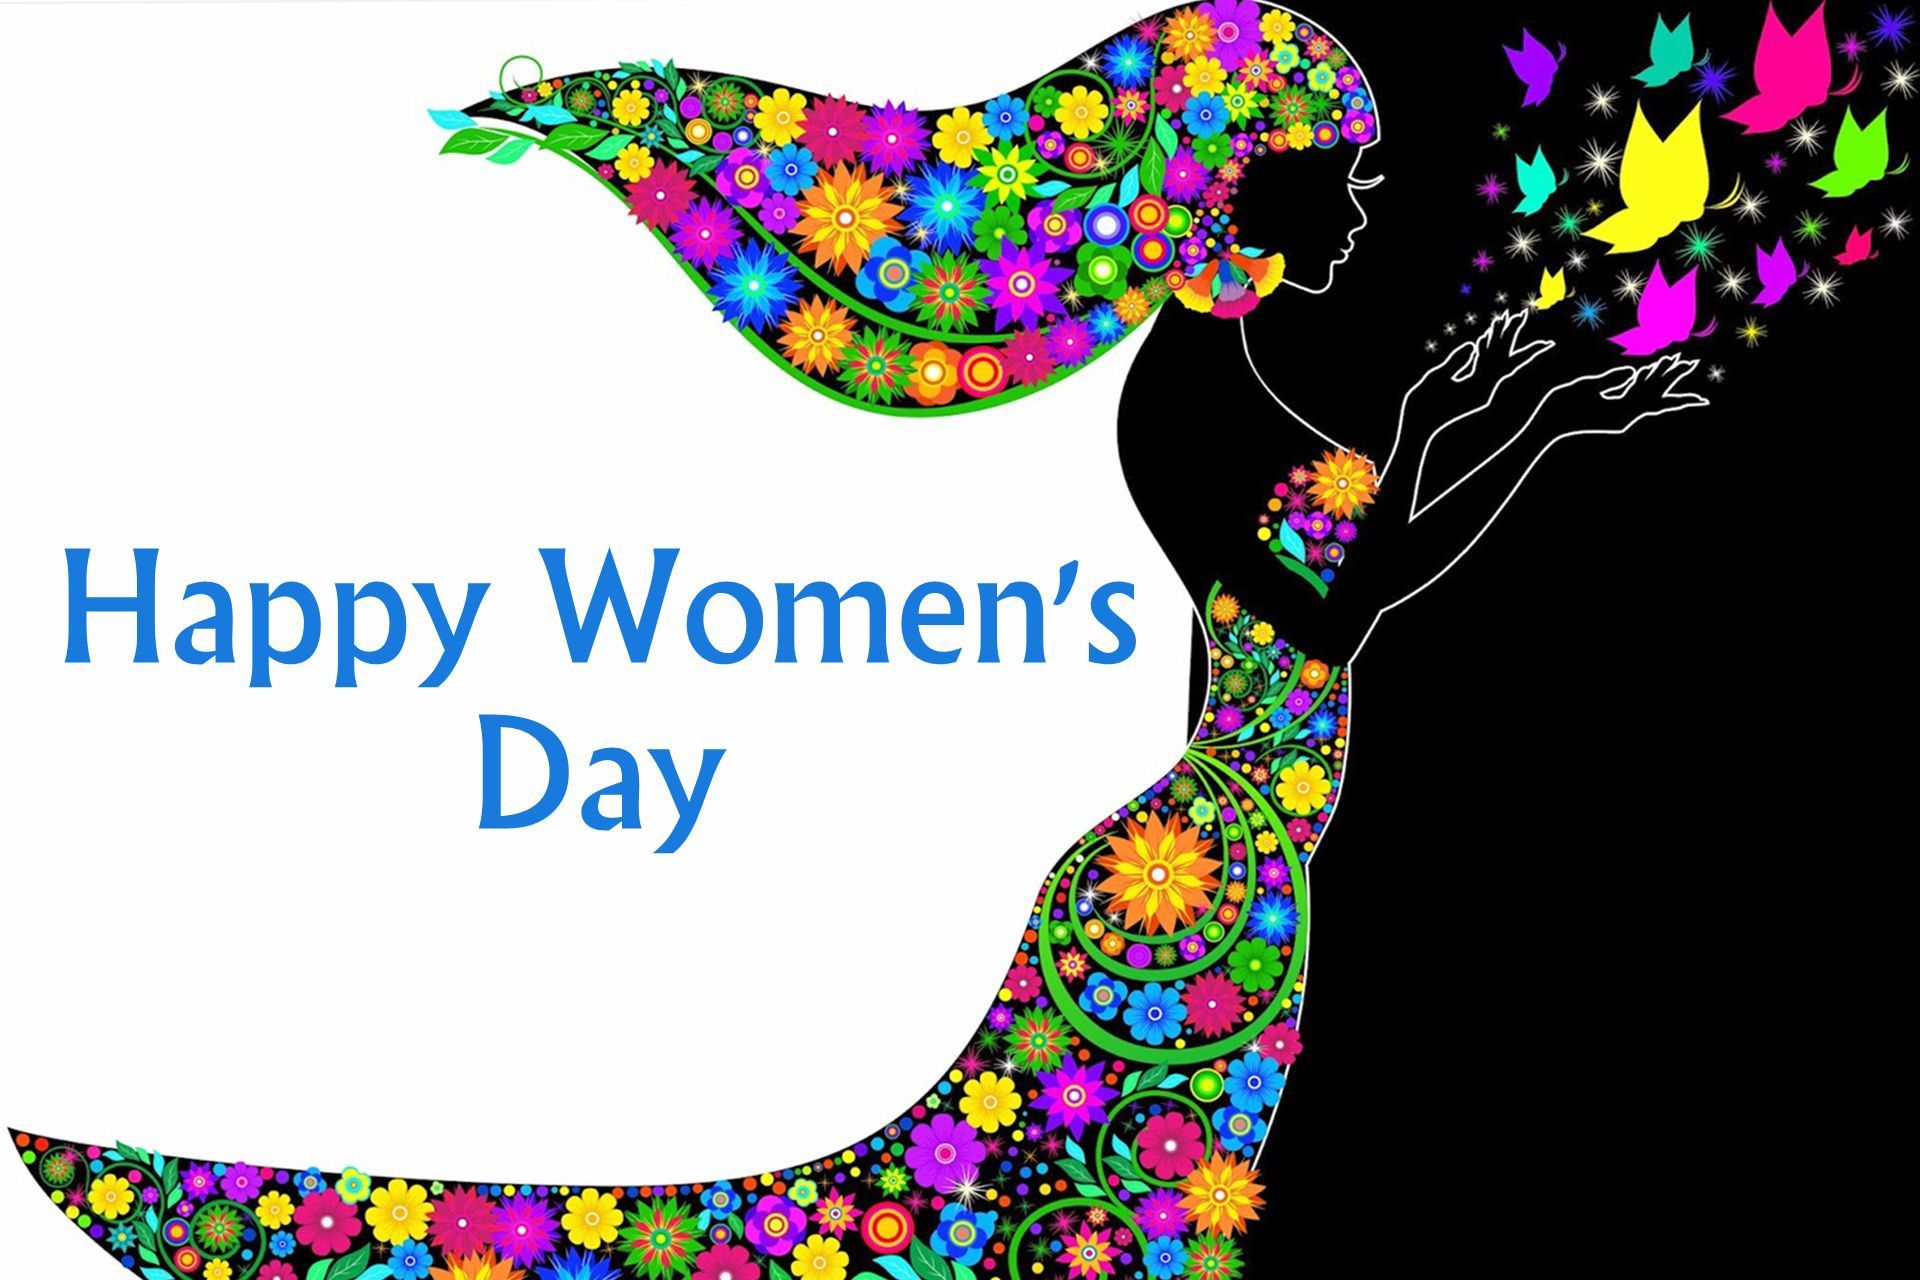 Women's Day wallpaper, Holiday, HQ Women's Day pictureK